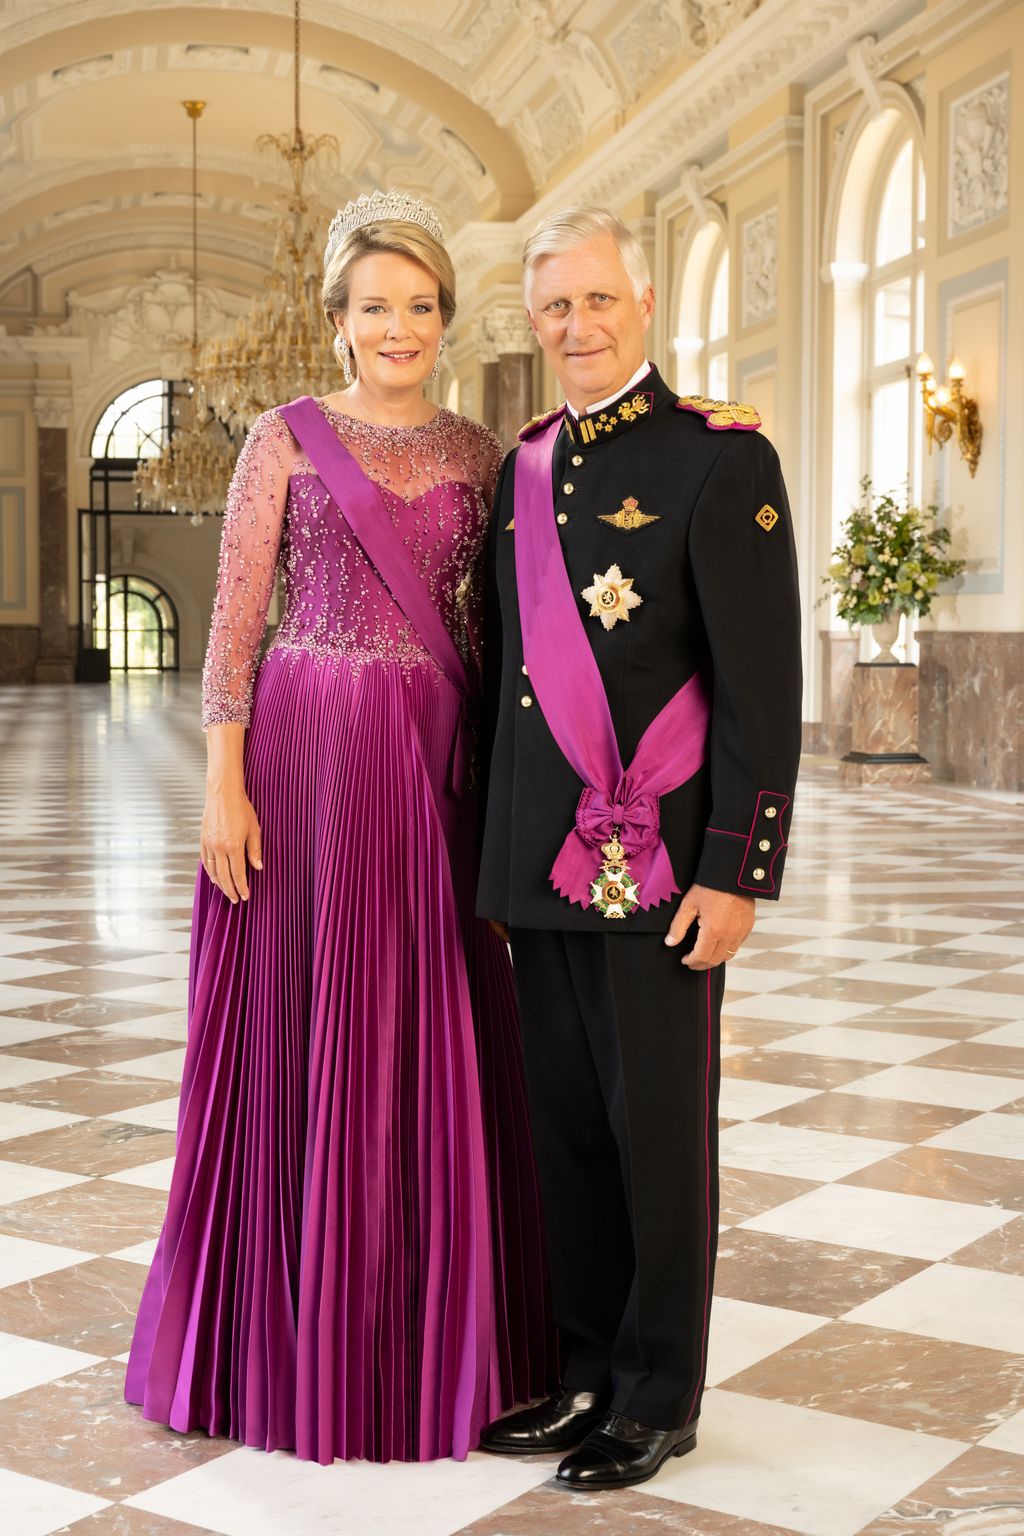 Queen Mathilde and King Philippe portrait